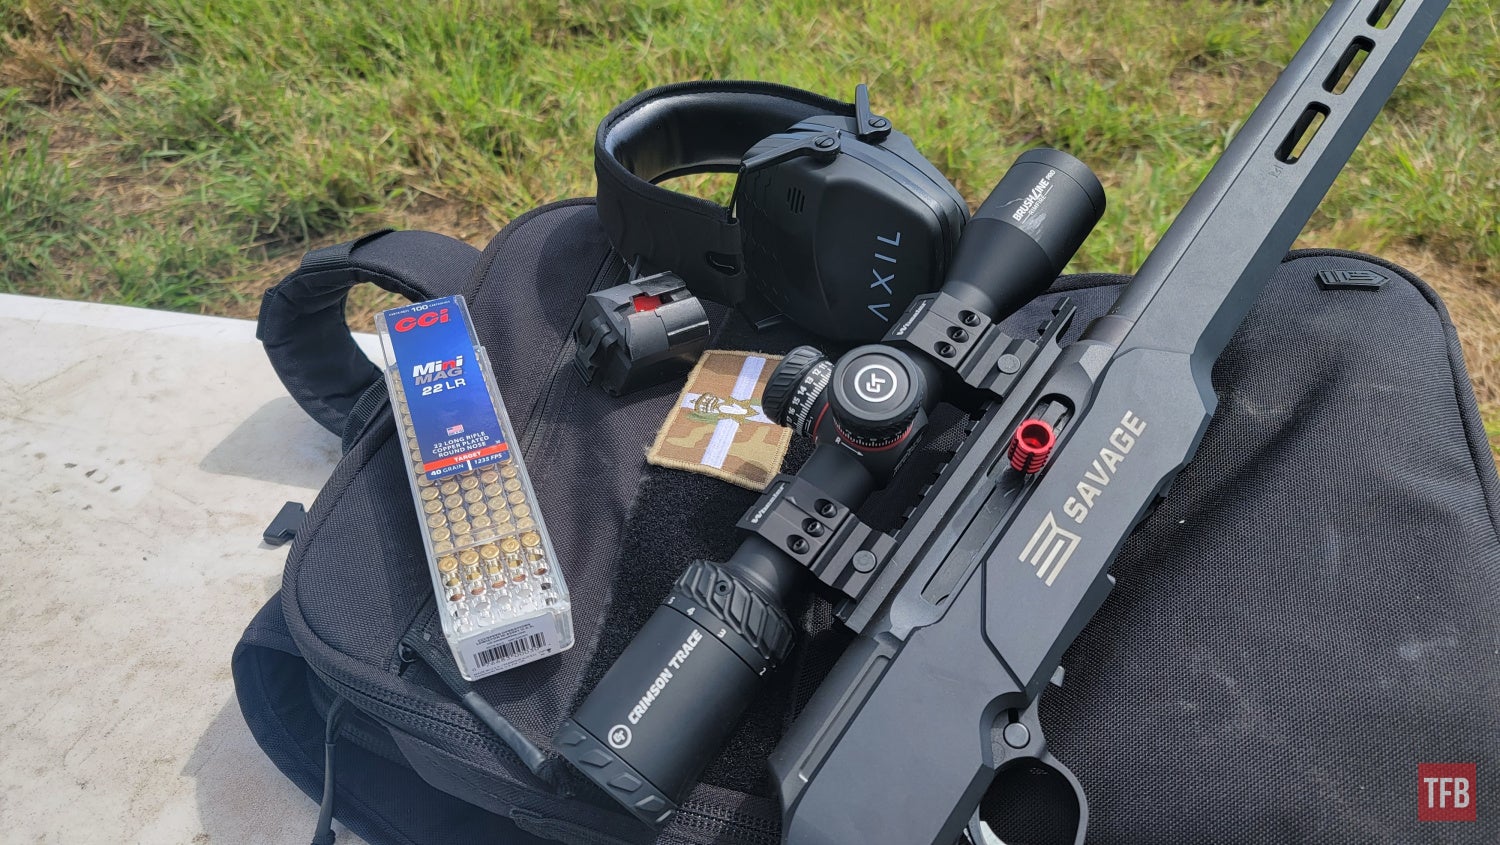 The Rimfire Report: Field Review of the Savage A22 Precision Rifle